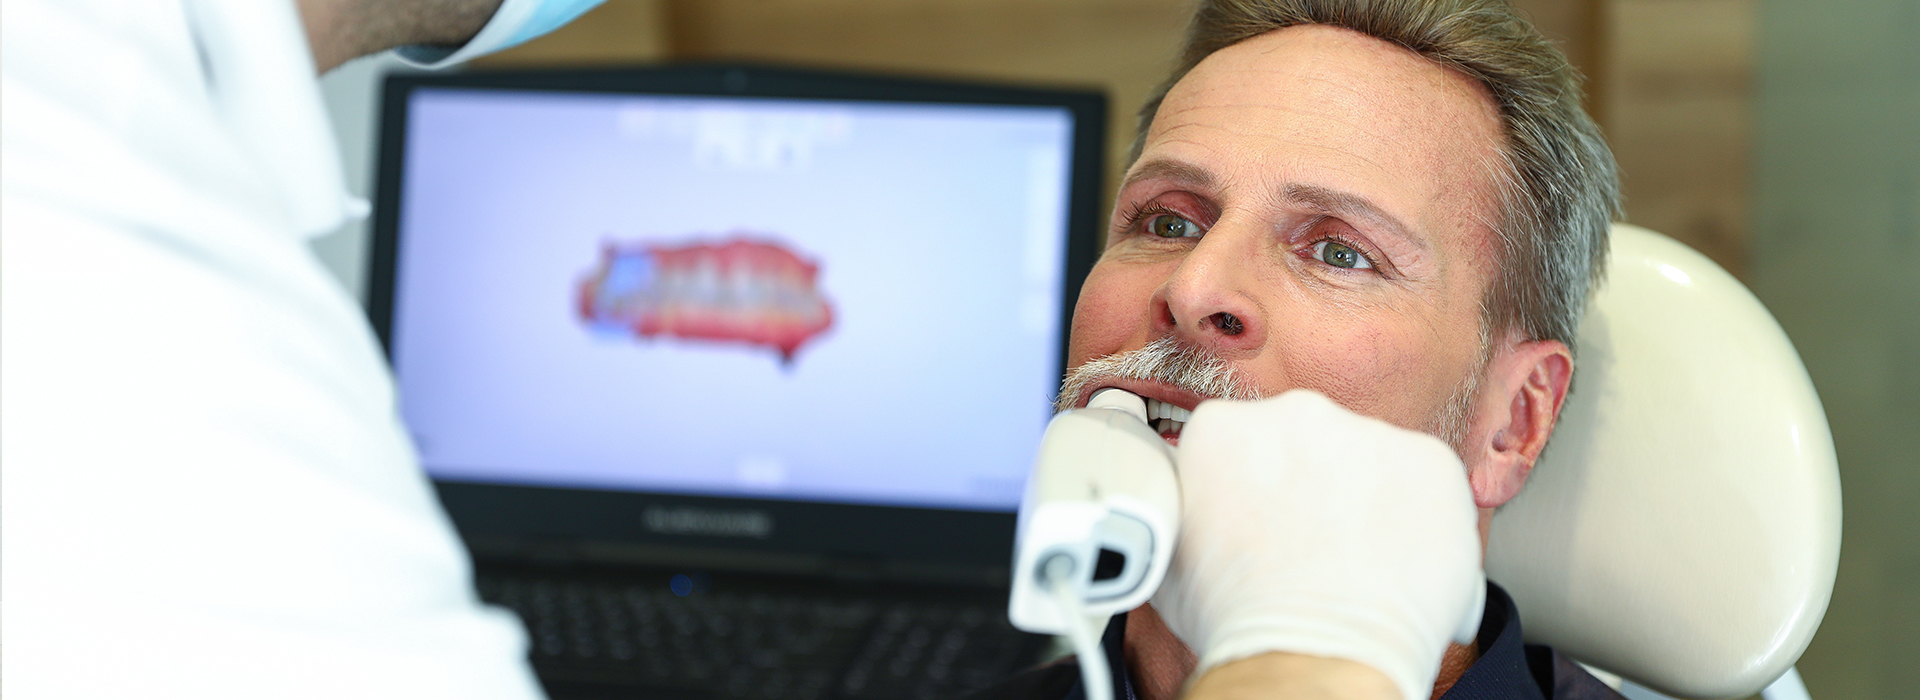 HP Dental | Digital Impressions, Sports Mouthguards and Dental Cleanings